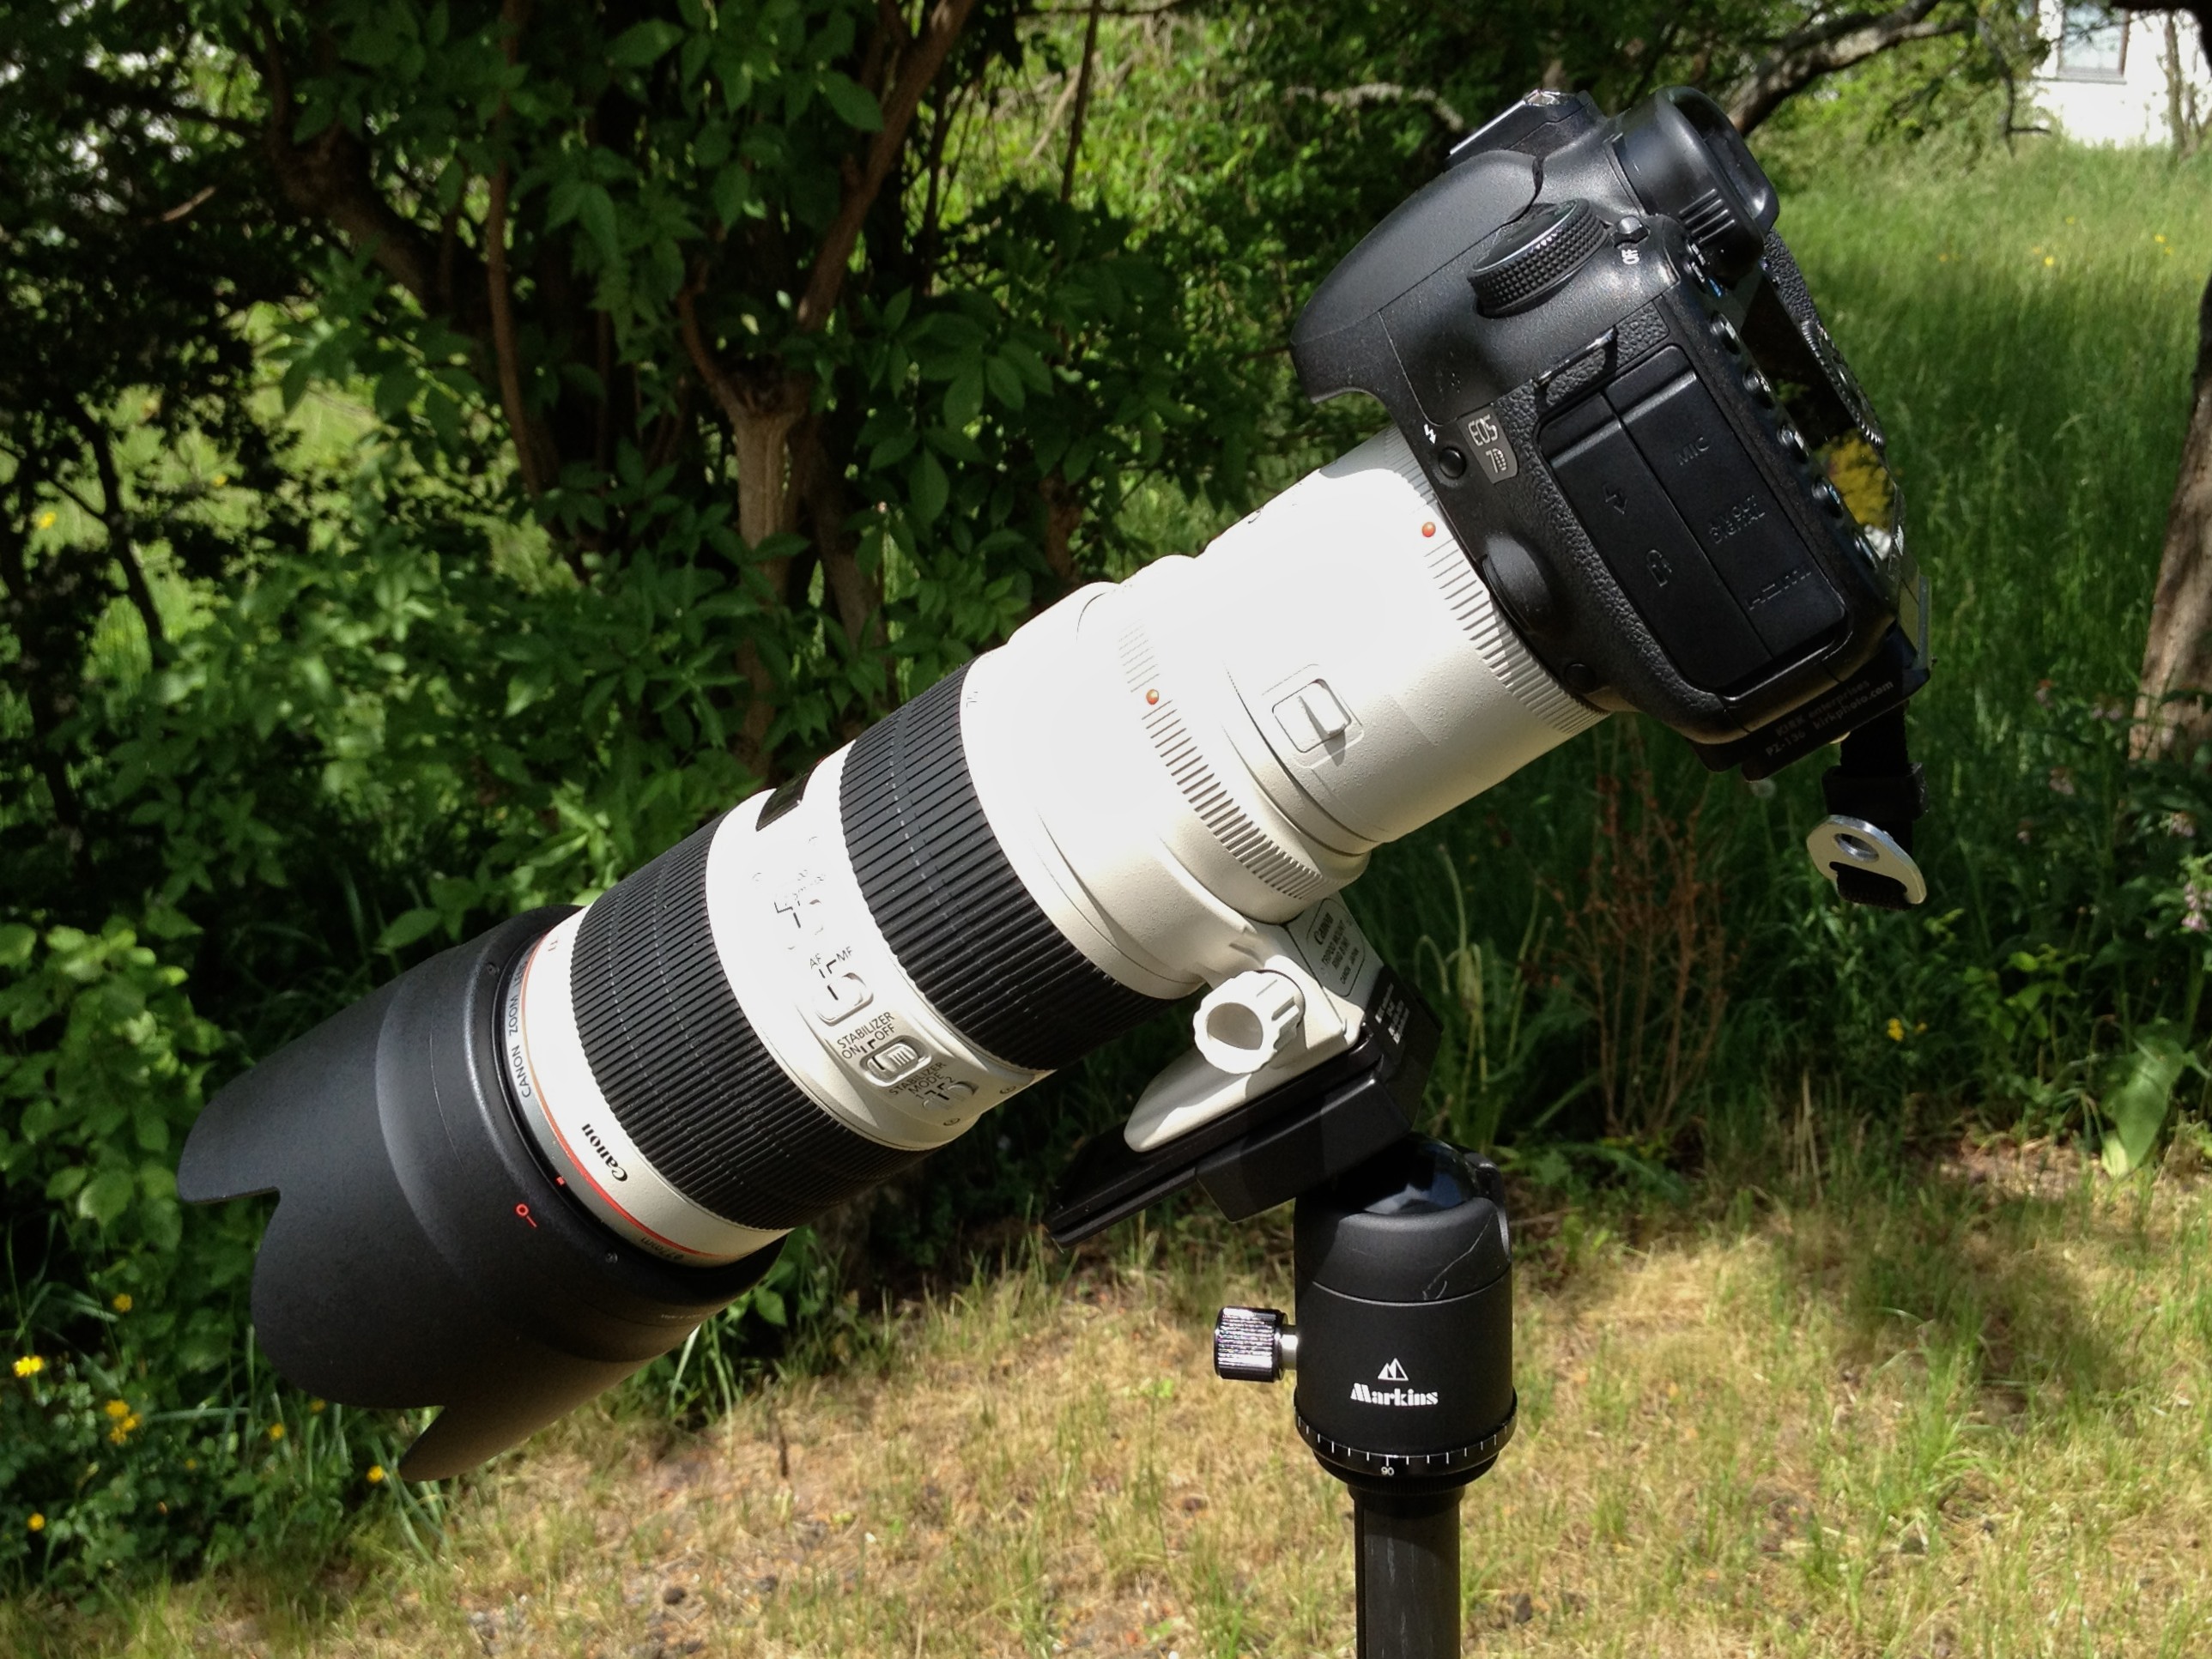 Load test with Canon EOS 7D, 2x Extender and 70-200mm/2.8